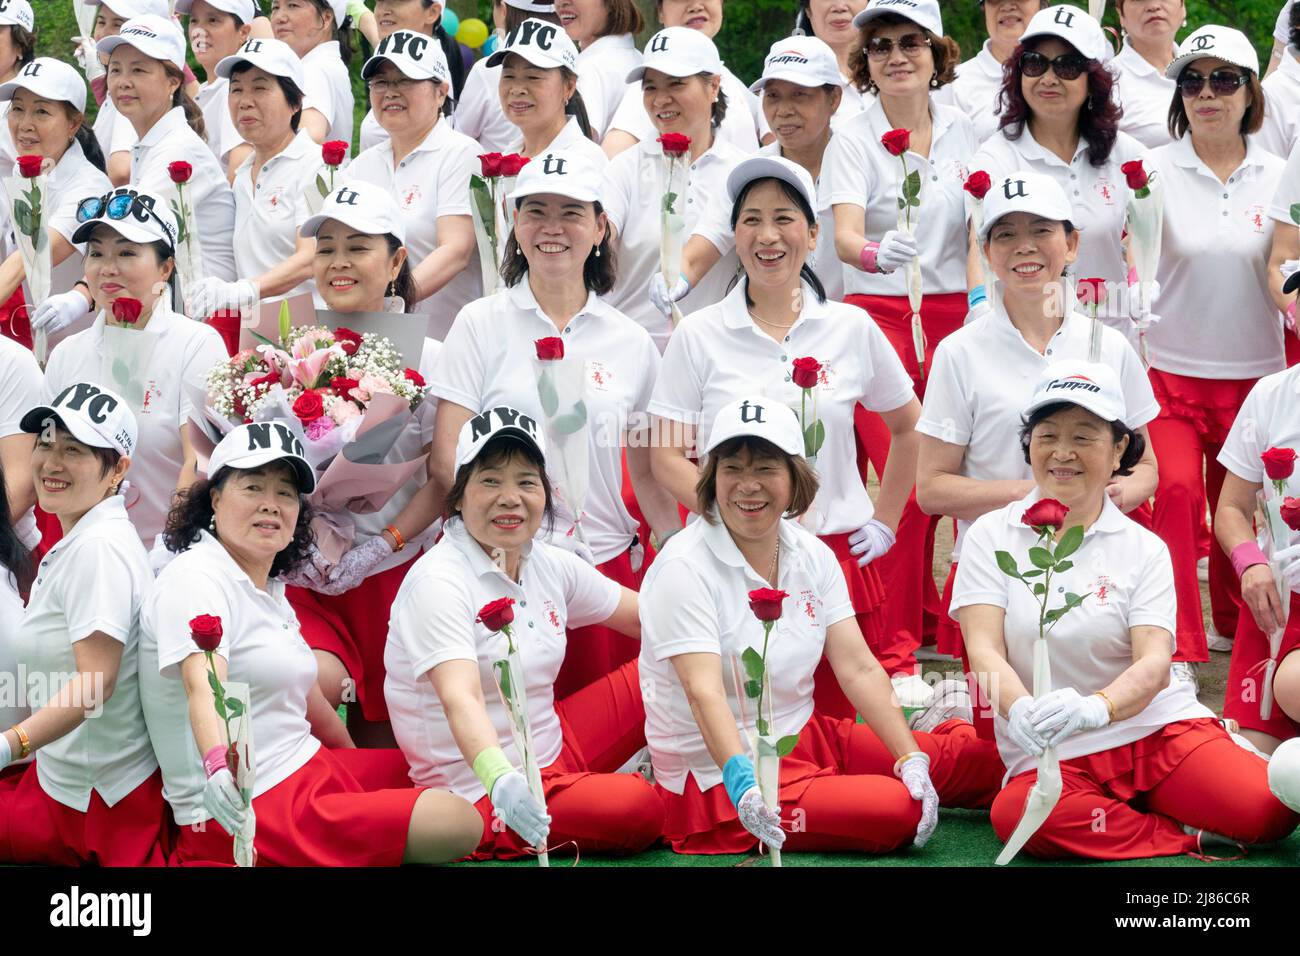 Women from Wenzhou, China in the Kai Xin Yizhu dance troupe celebrate Mother's Day by posing for a group photo while holding roses. In a park in NYC. Stock Photo